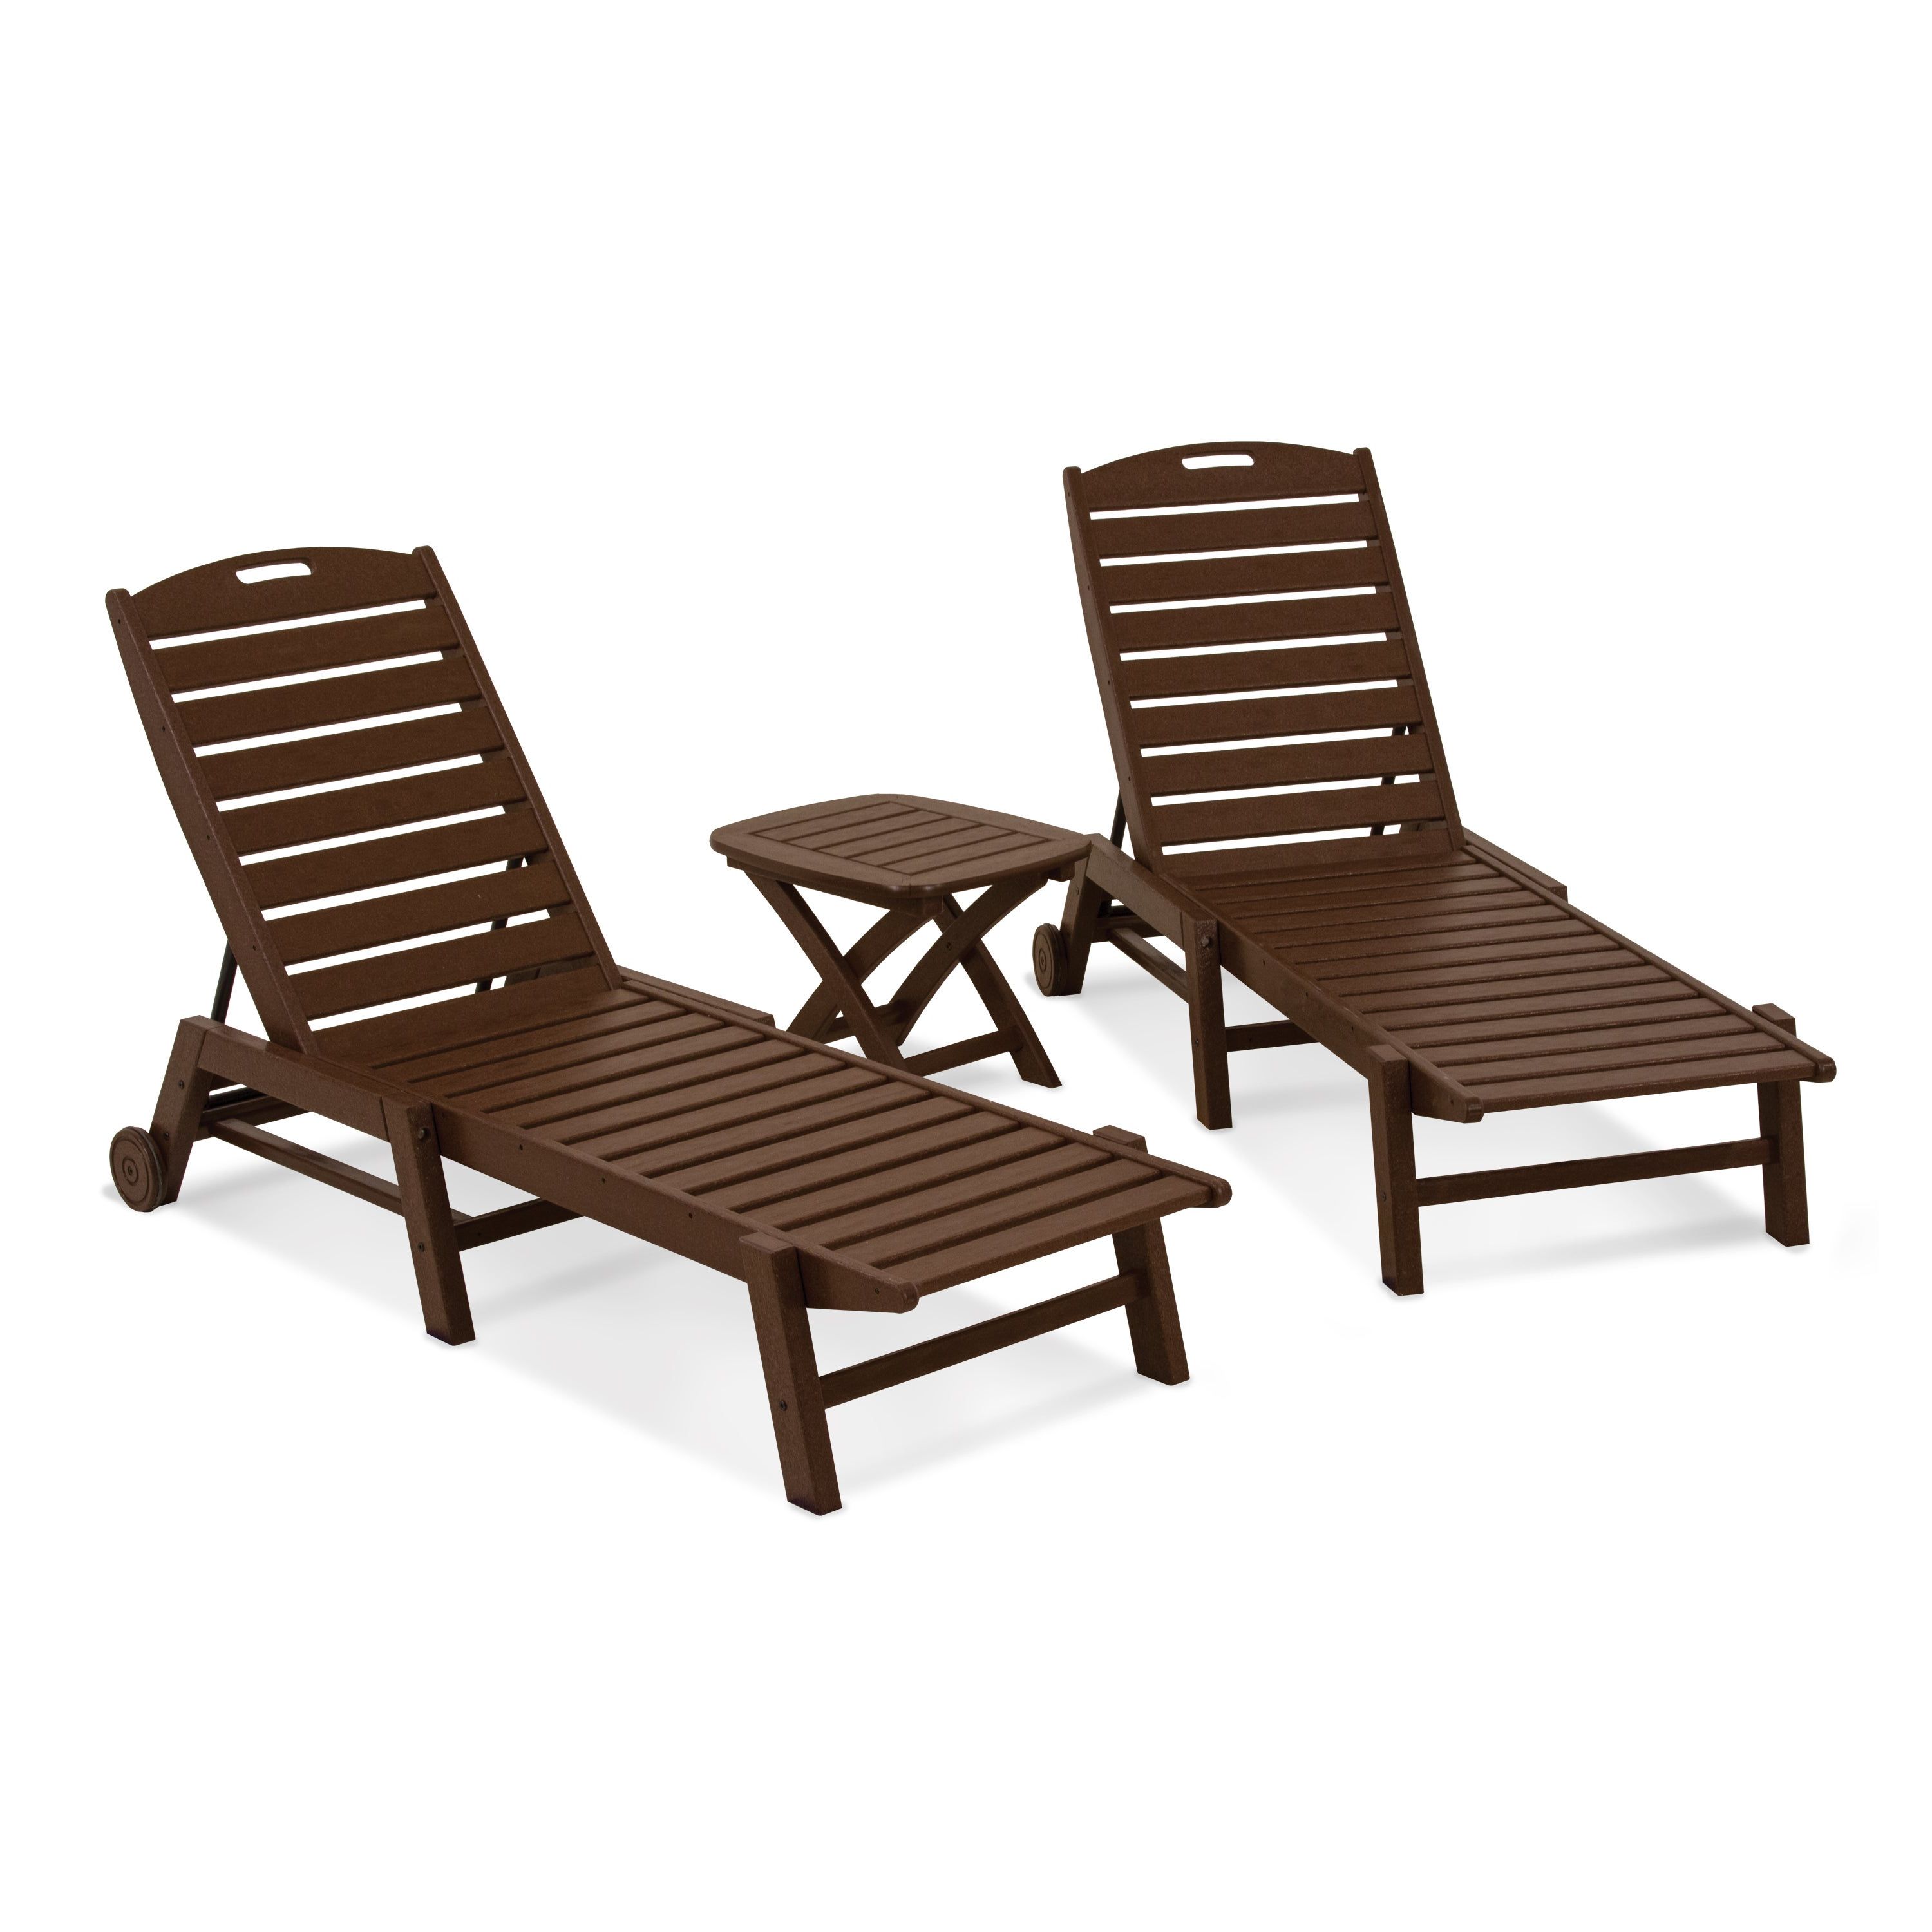 Popular Nautical 3 Piece Outdoor Chaise Lounge Sets With Wheels And Table With Regard To Polywood® Nautical 3 Piece Outdoor Chaise Lounge Set With Table (View 4 of 25)